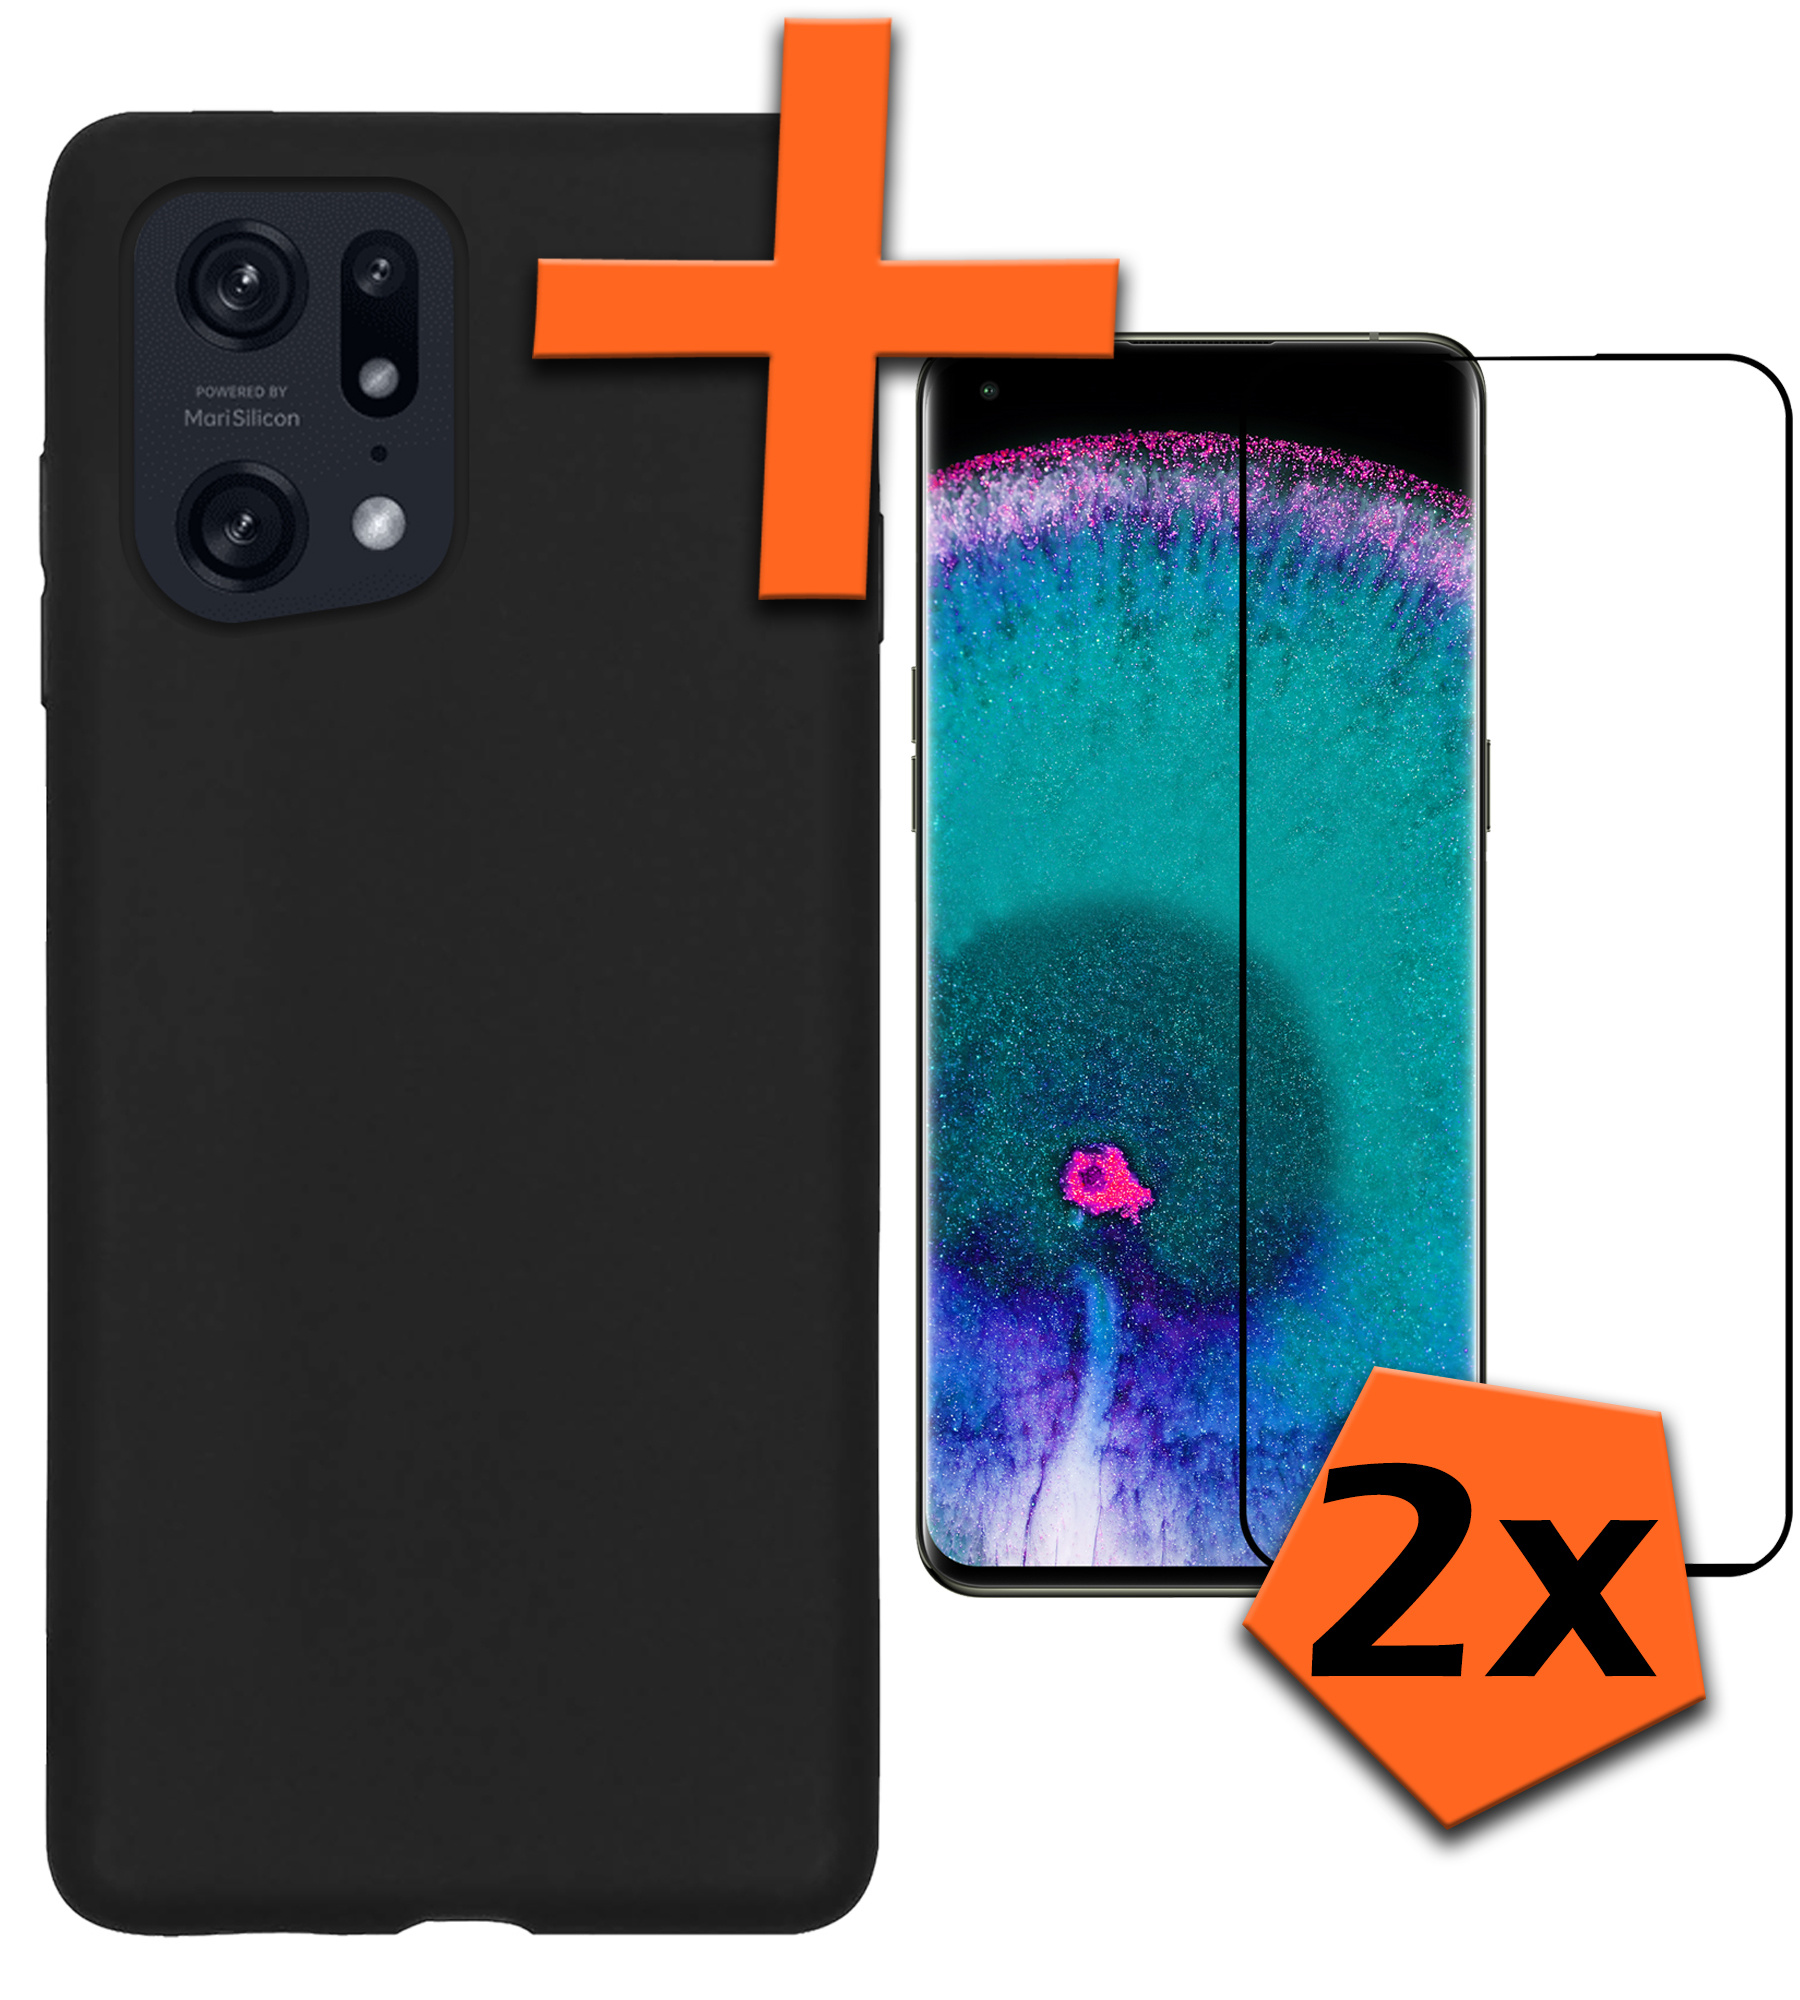 Nomfy OPPO Find X5 Pro Hoesje Siliconen Case Back Cover Met 2x Screenprotector - OPPO Find X5 Pro Hoes Cover Silicone - Zwart